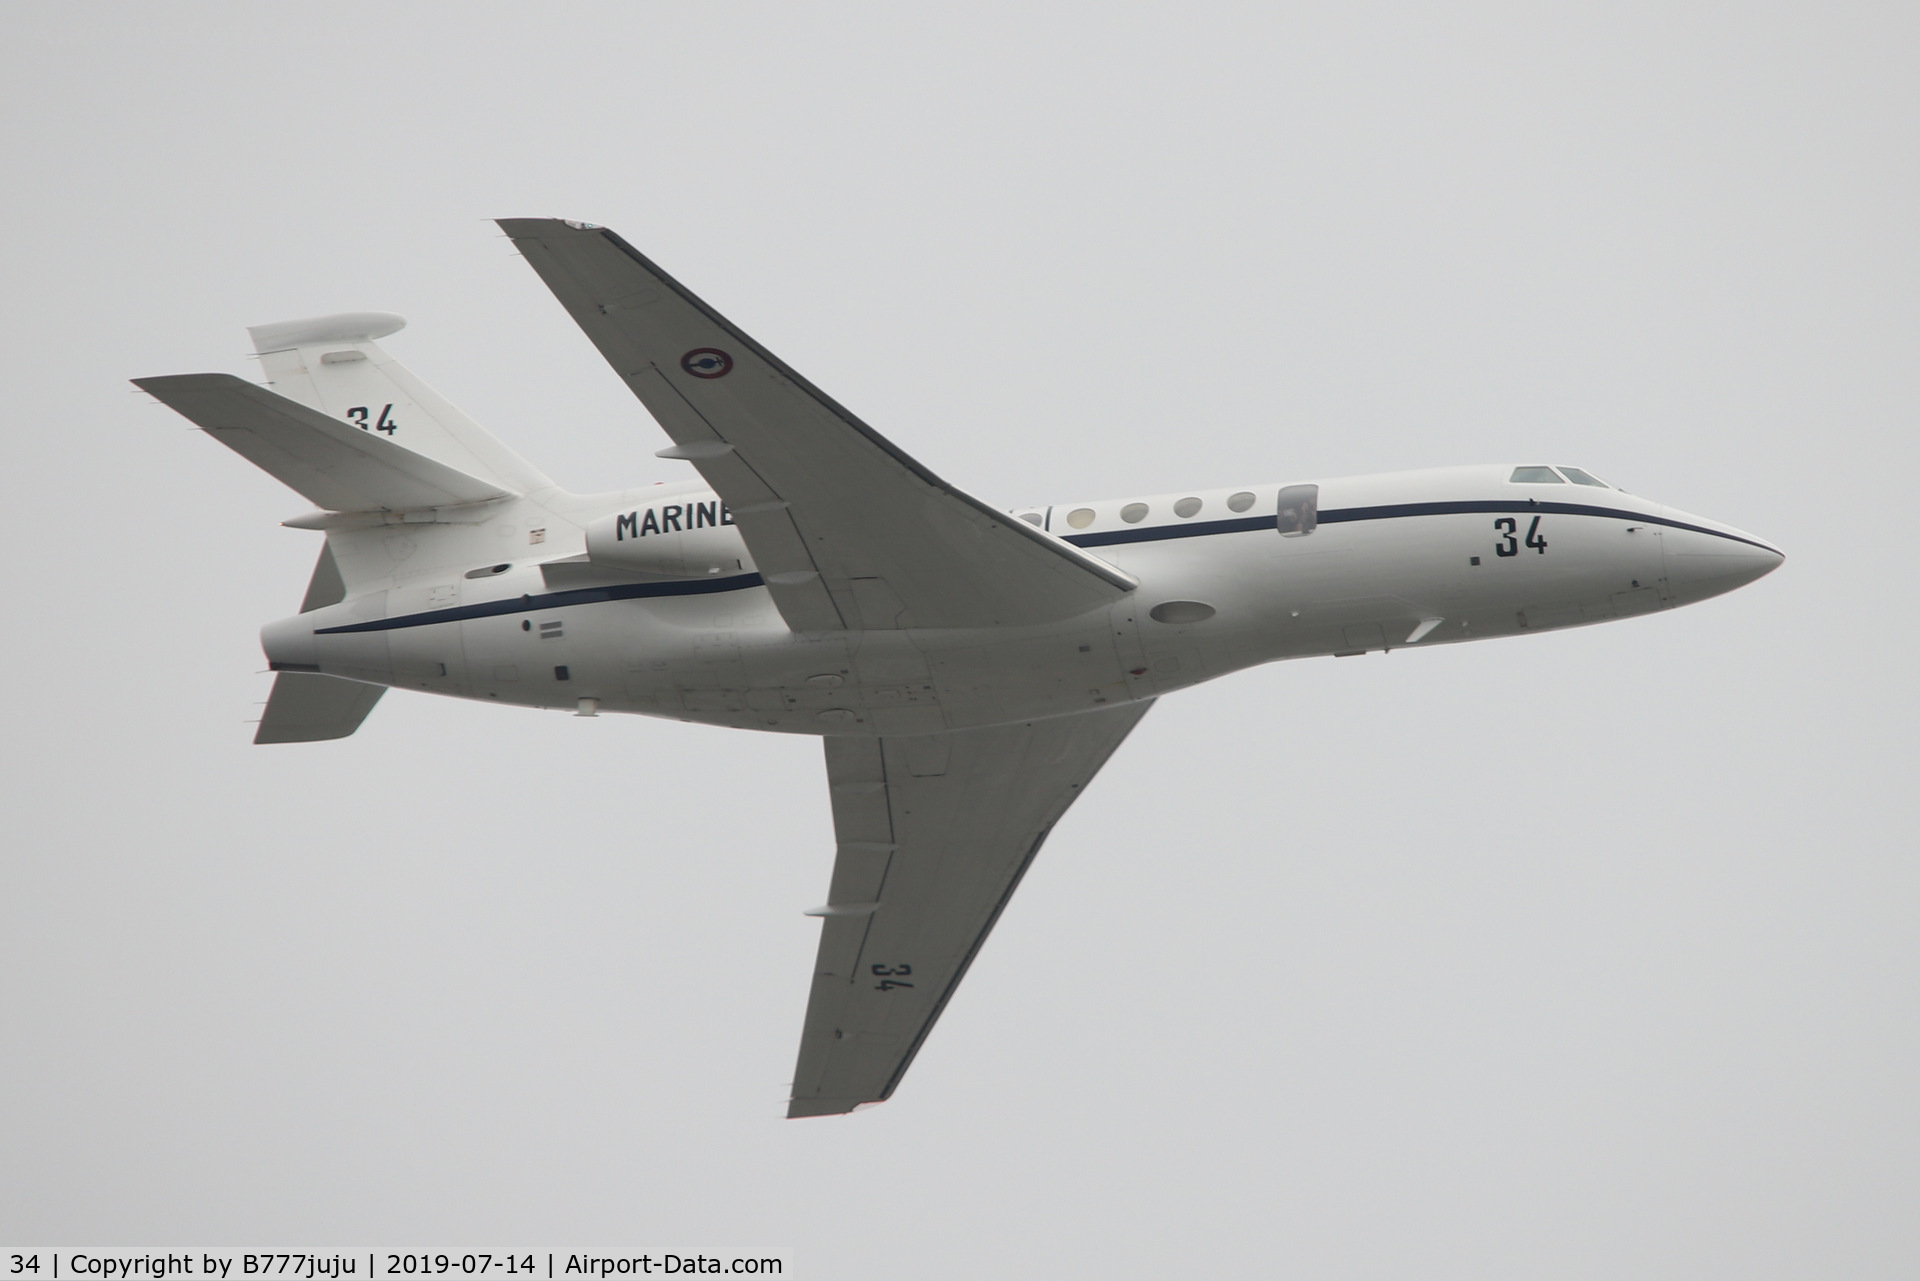 34, 1981 Dassault Falcon 50 C/N 34, during French Parade over Paris